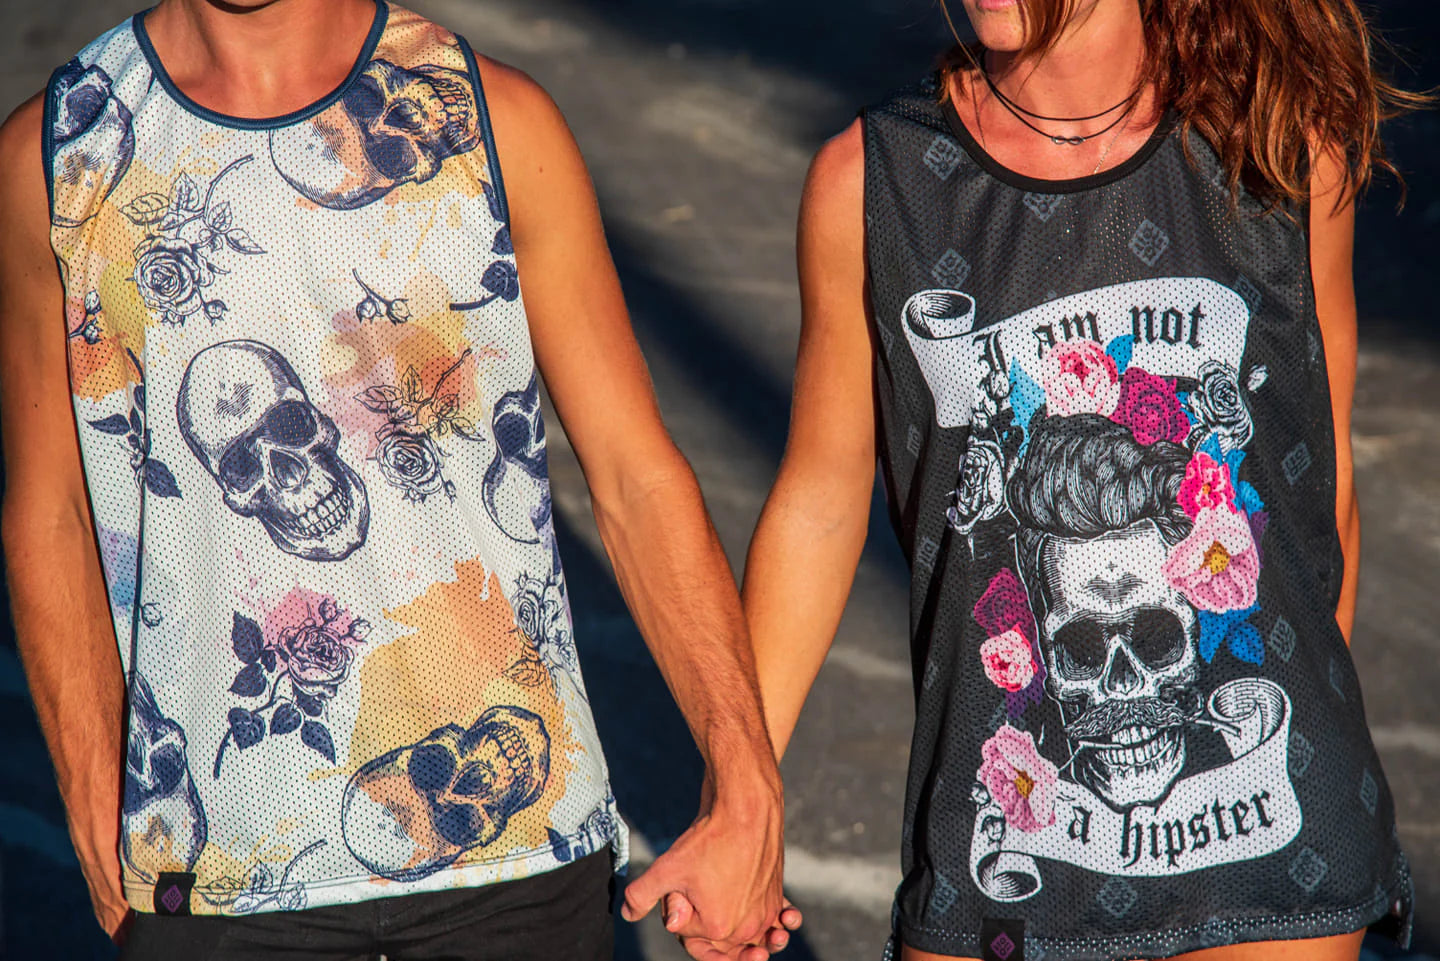 Original Tank Top Hipster NoHo Collections